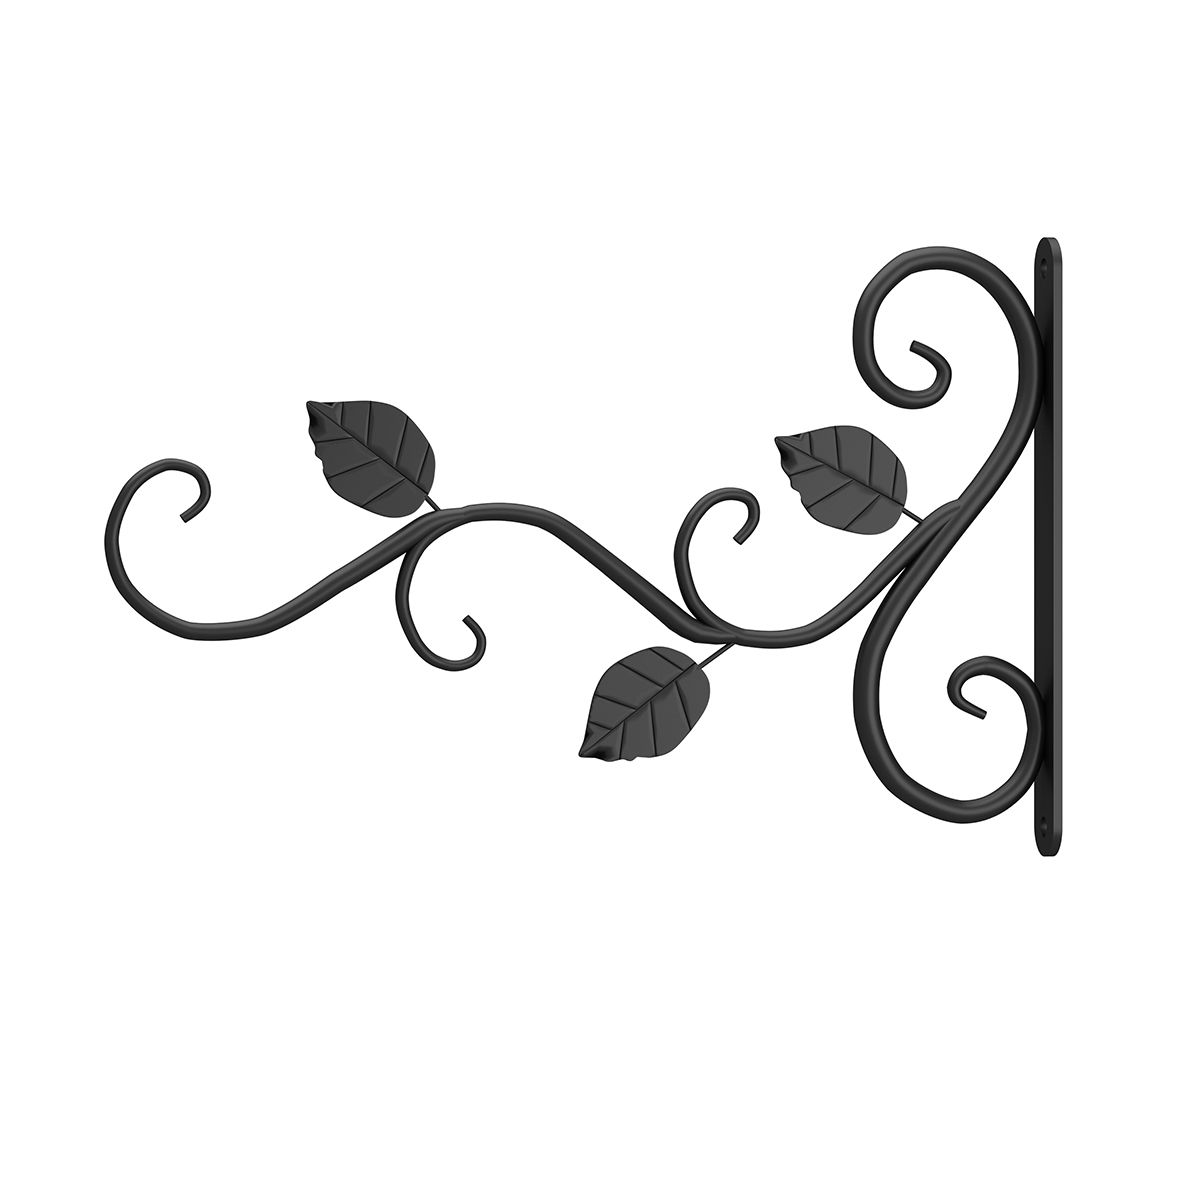 Wall-Hanging-Flower-Stand-Outdoor-Balcony-Hanging-Basket-Stand-Green-Radish-Hanger-Wrought-Iron-Hook-1718888